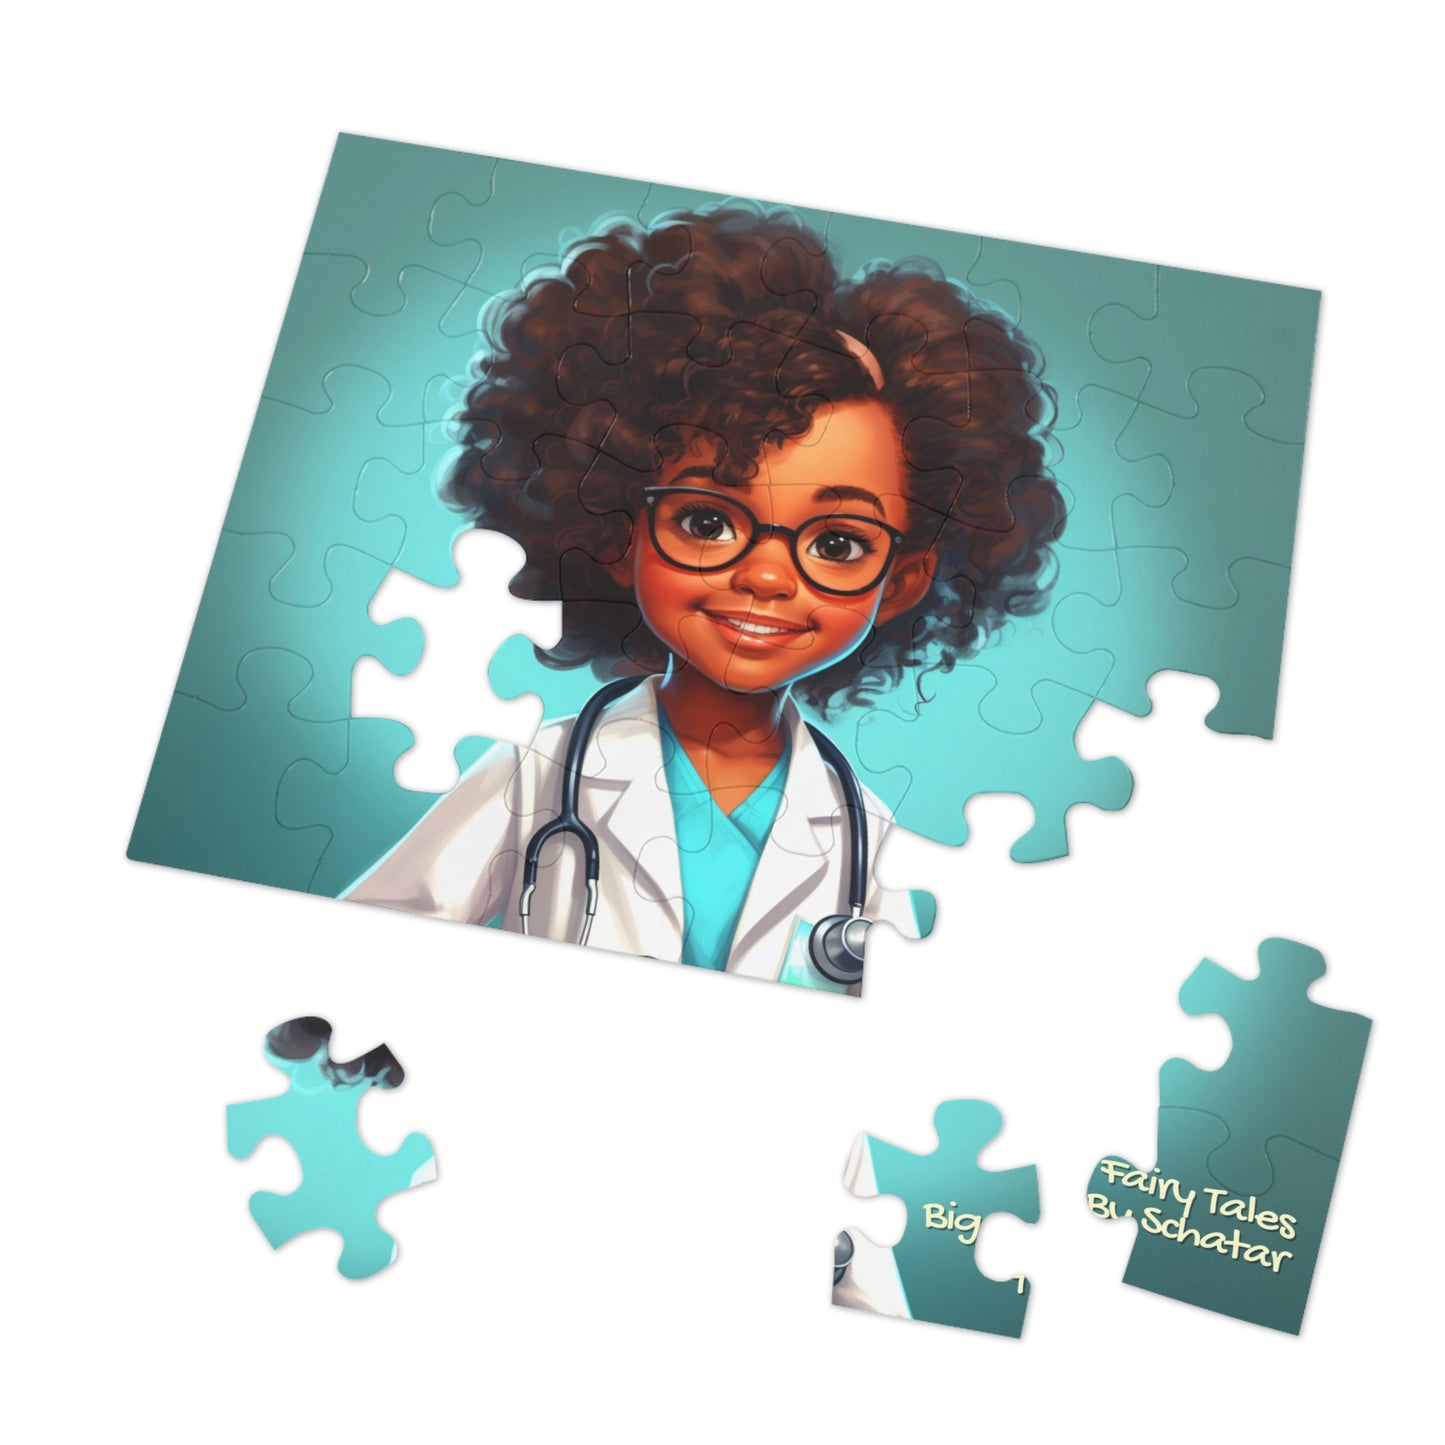 The Doctor - Big Little Professionals Puzzle 7 From Big Fairy Tales By Schatar